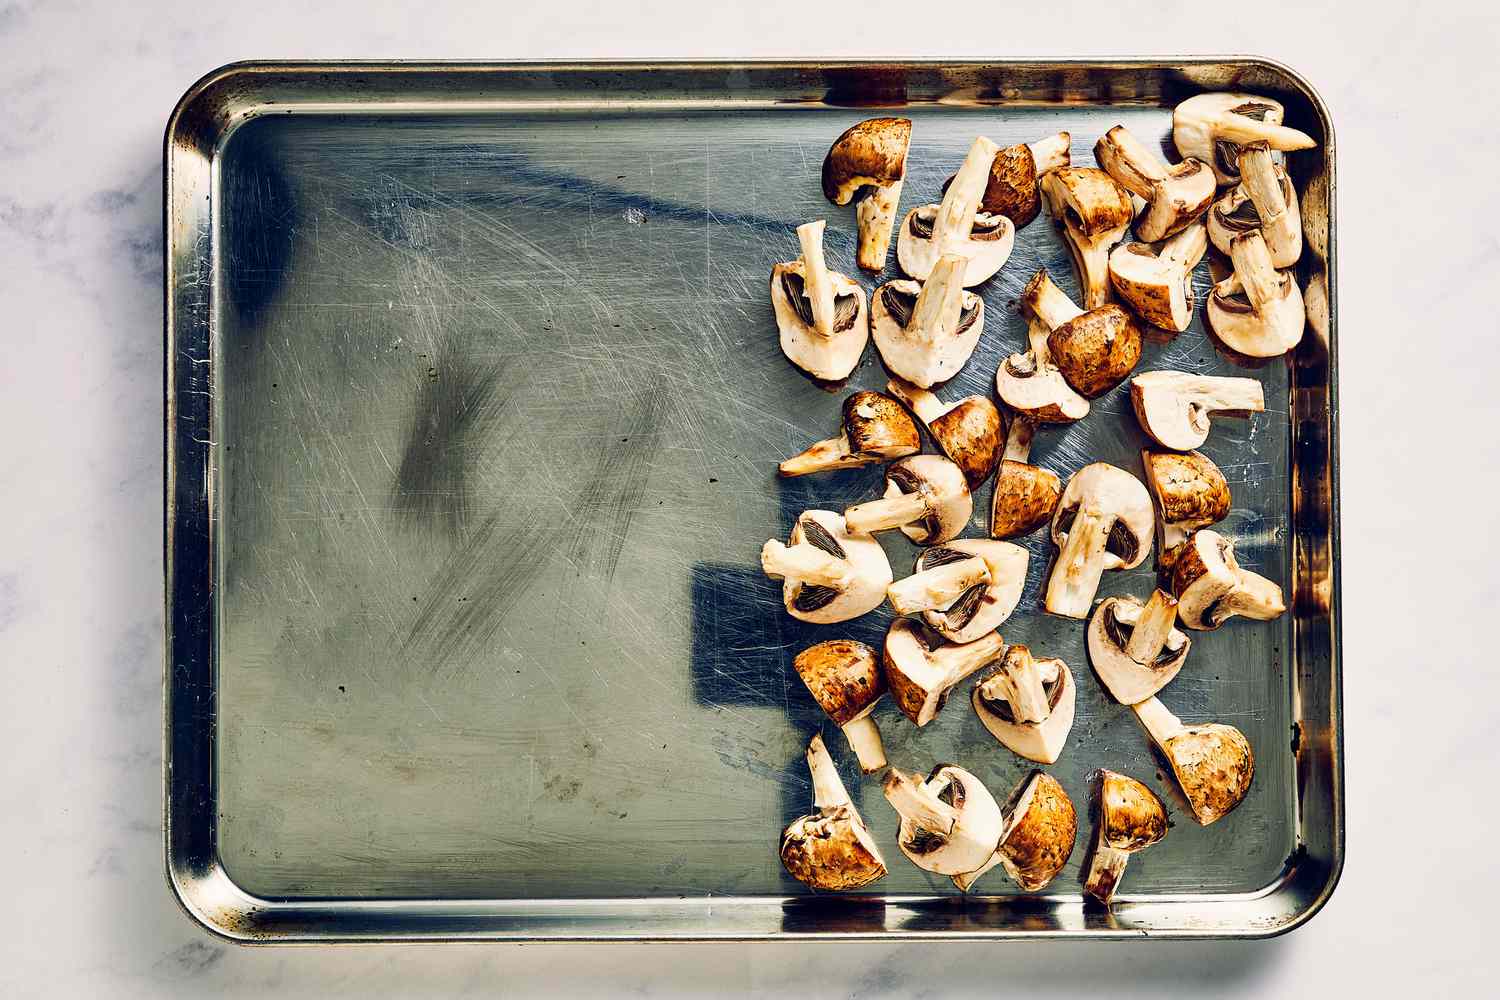 A sheet pan with half the pan covered in cremini mushrooms tossed in oil and seasoned with salt